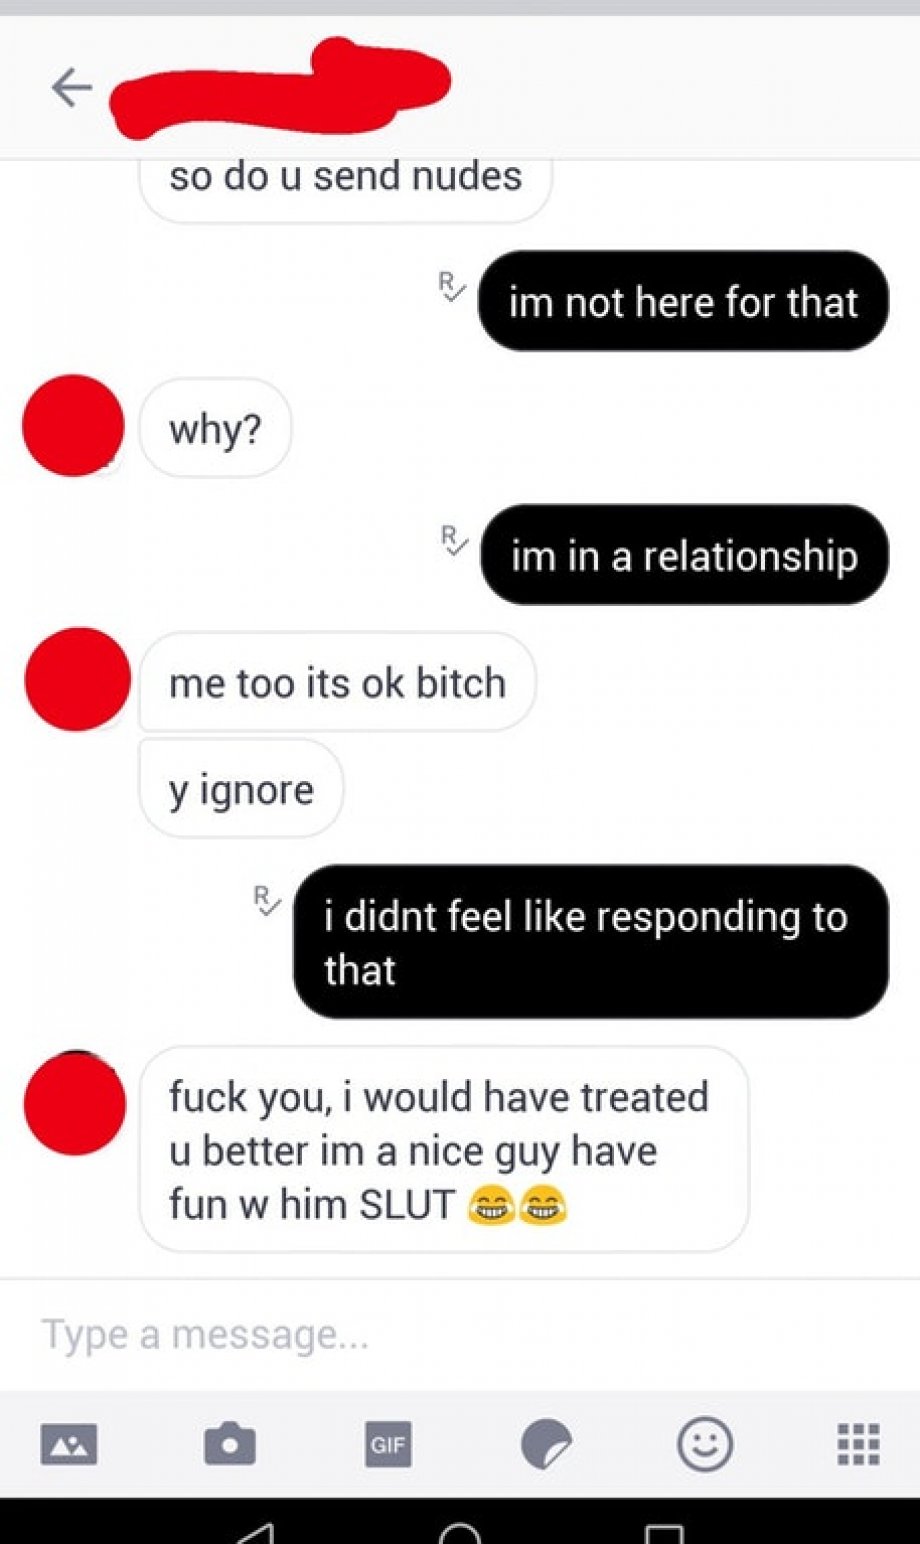 so do u send nudes im not here for that why? im in a relationship me too its ok bitch y ignore i didnt feel responding to that fuck you, i would have treated u better im a nice guy have fun w him Slut Type a message... Gif